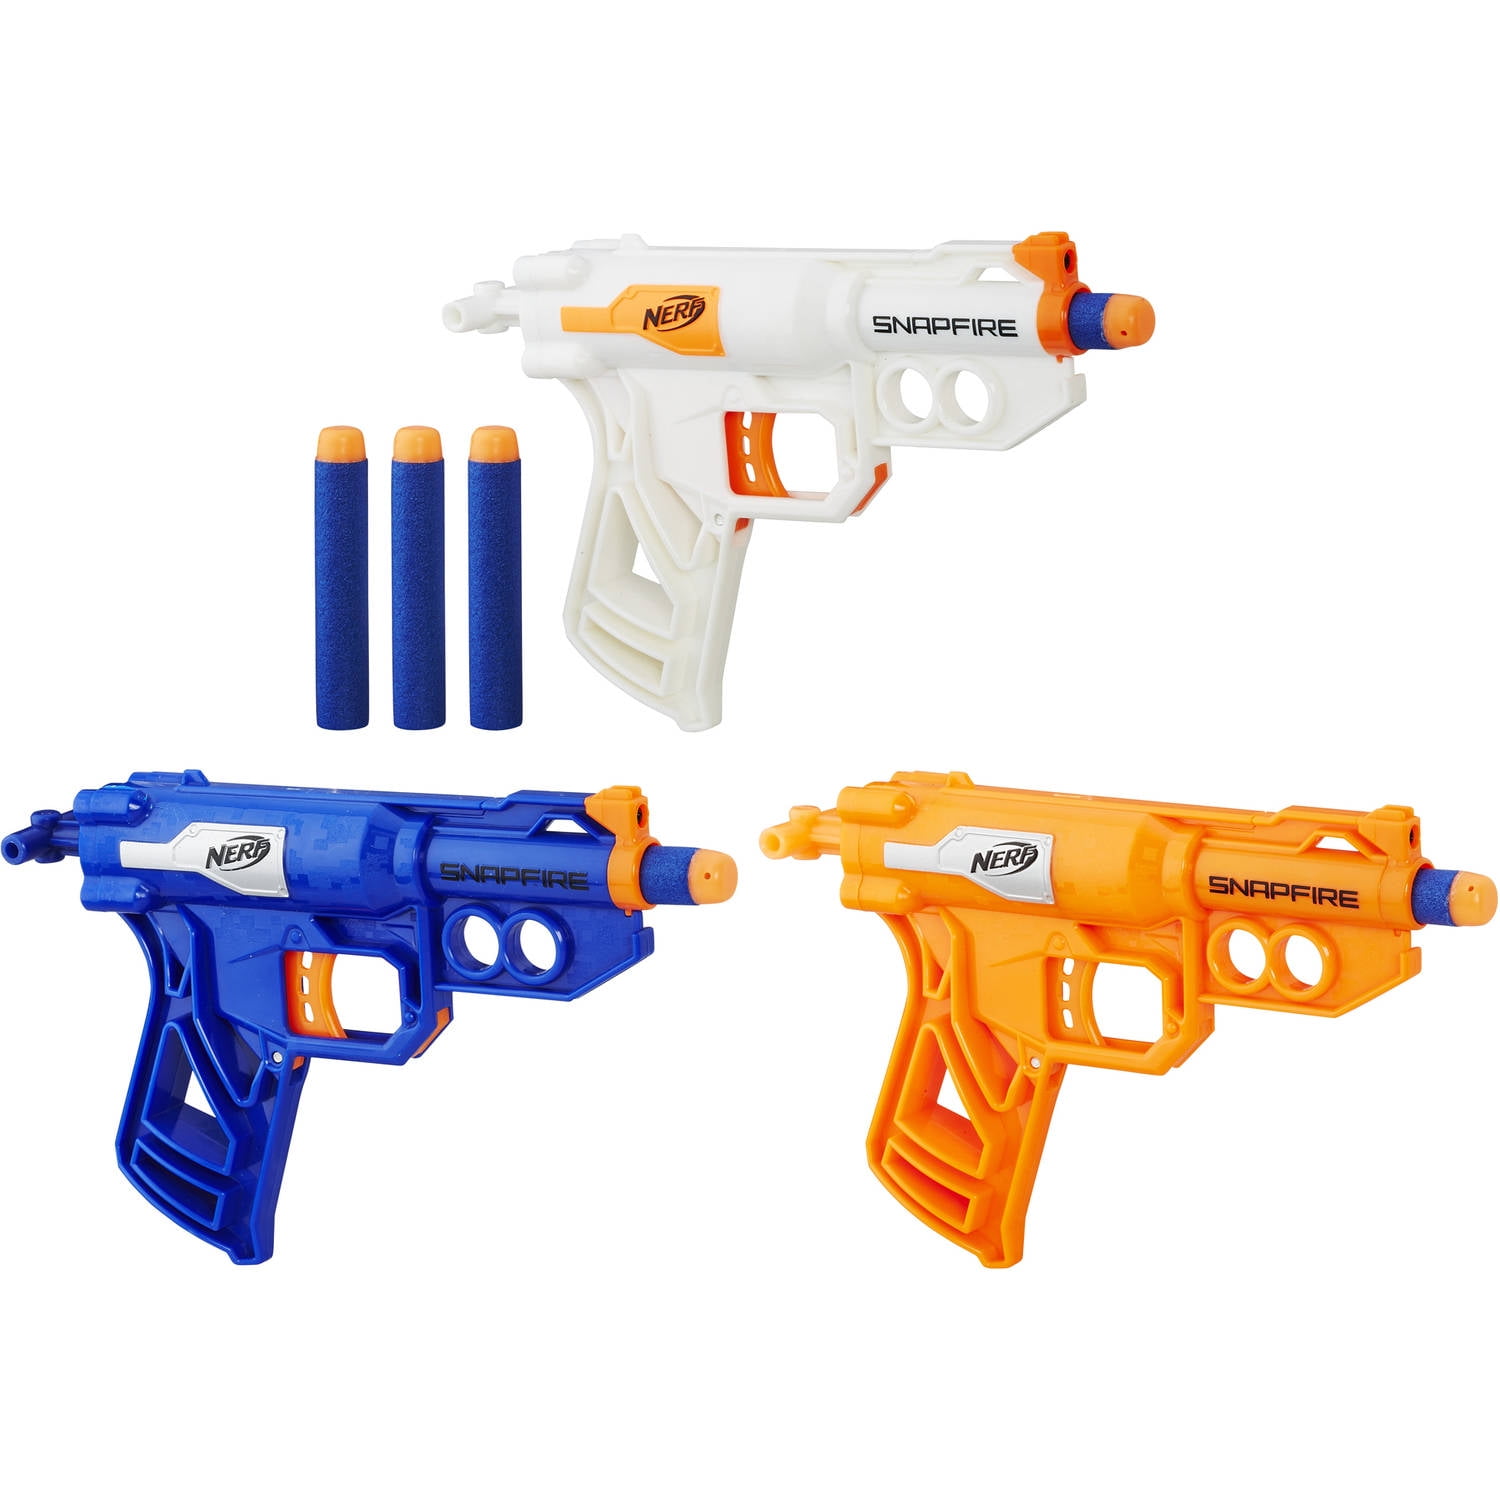 NERF Rebelle Message Dart Refill A8861 0000 for sale online